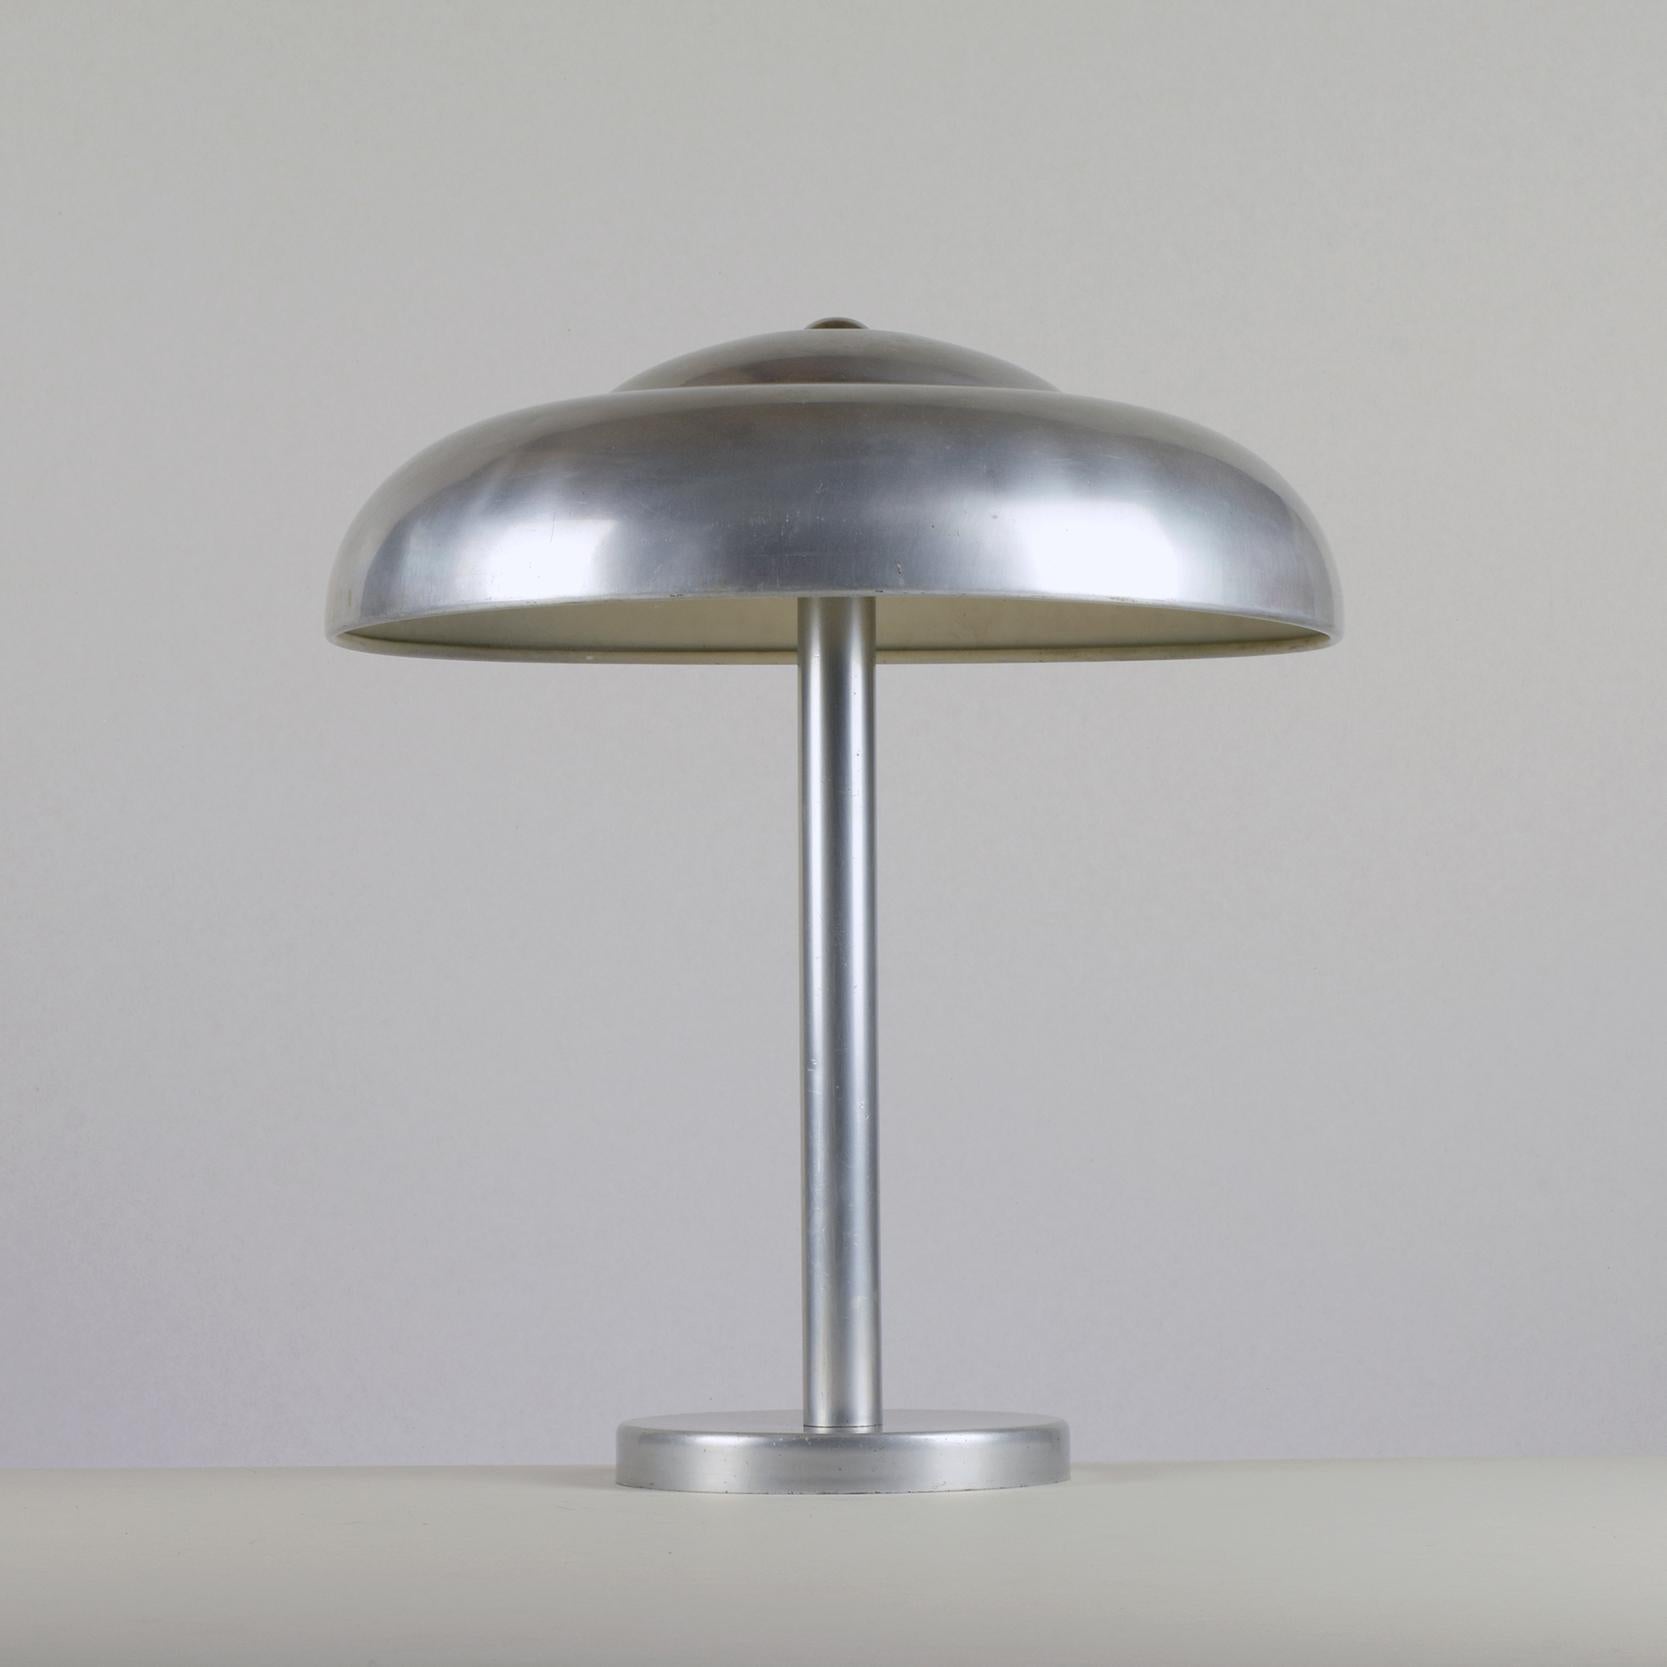 German Modernist Bauhaus 1930s Aluminum Table Lamp in Style Wagenfeld, Dell, Brandt For Sale